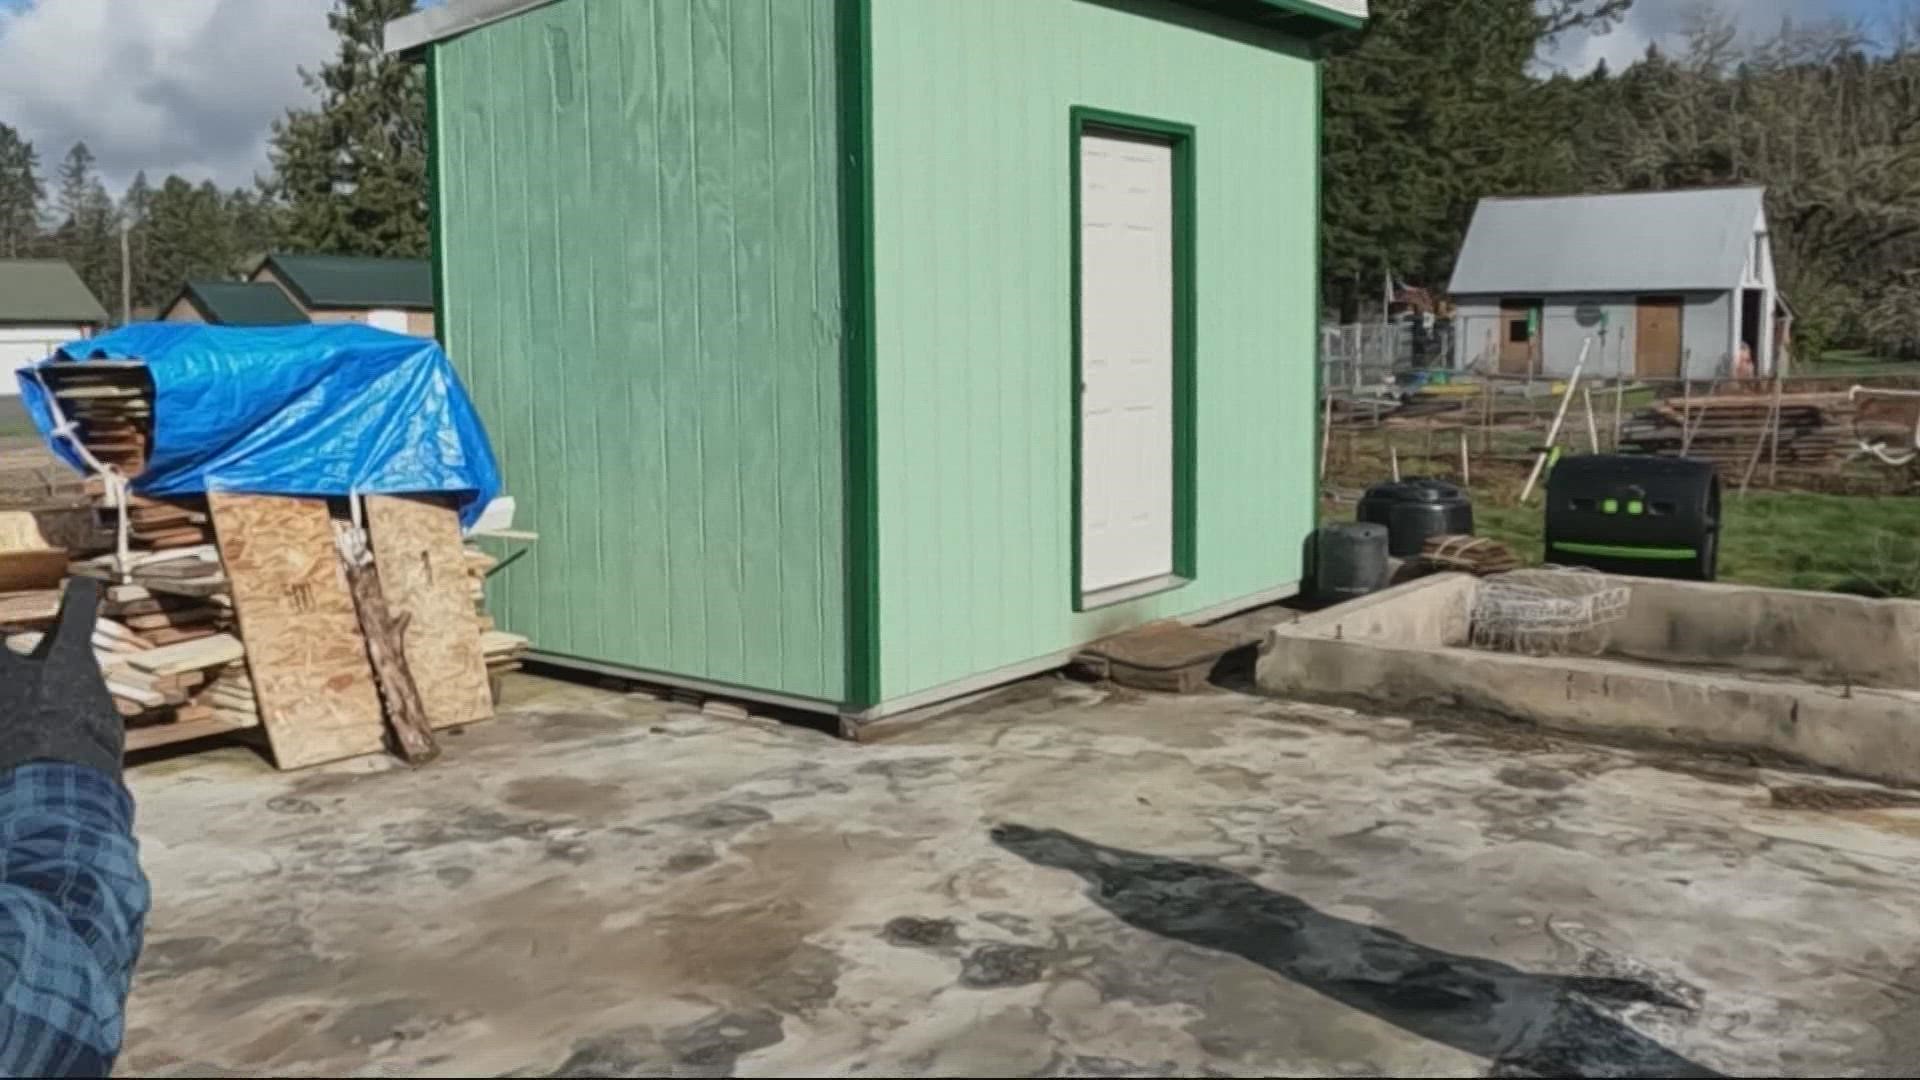 Members of the Associated General Contractors donate their time to build structures that wildfire survivors can use to store their belongings in while they rebuild.